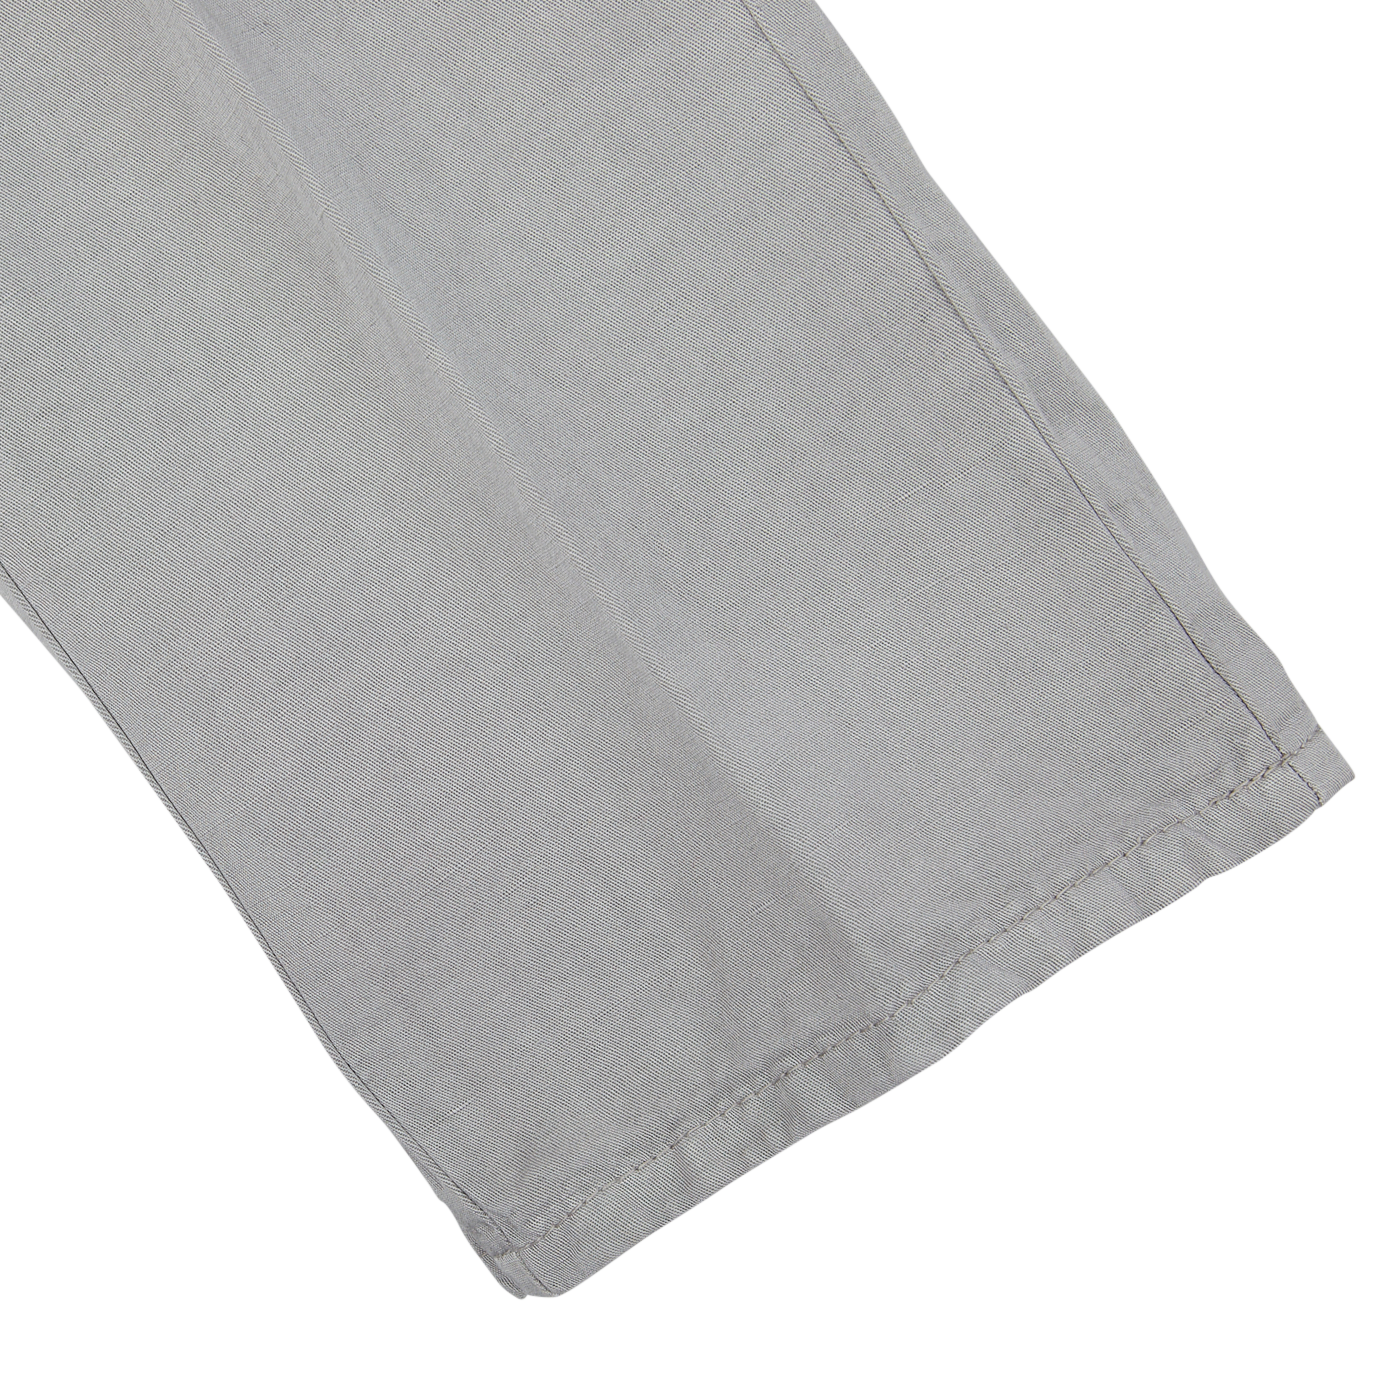 A pair of Berwich Light Grey Linen Blend Flat Front Trousers on a white surface.